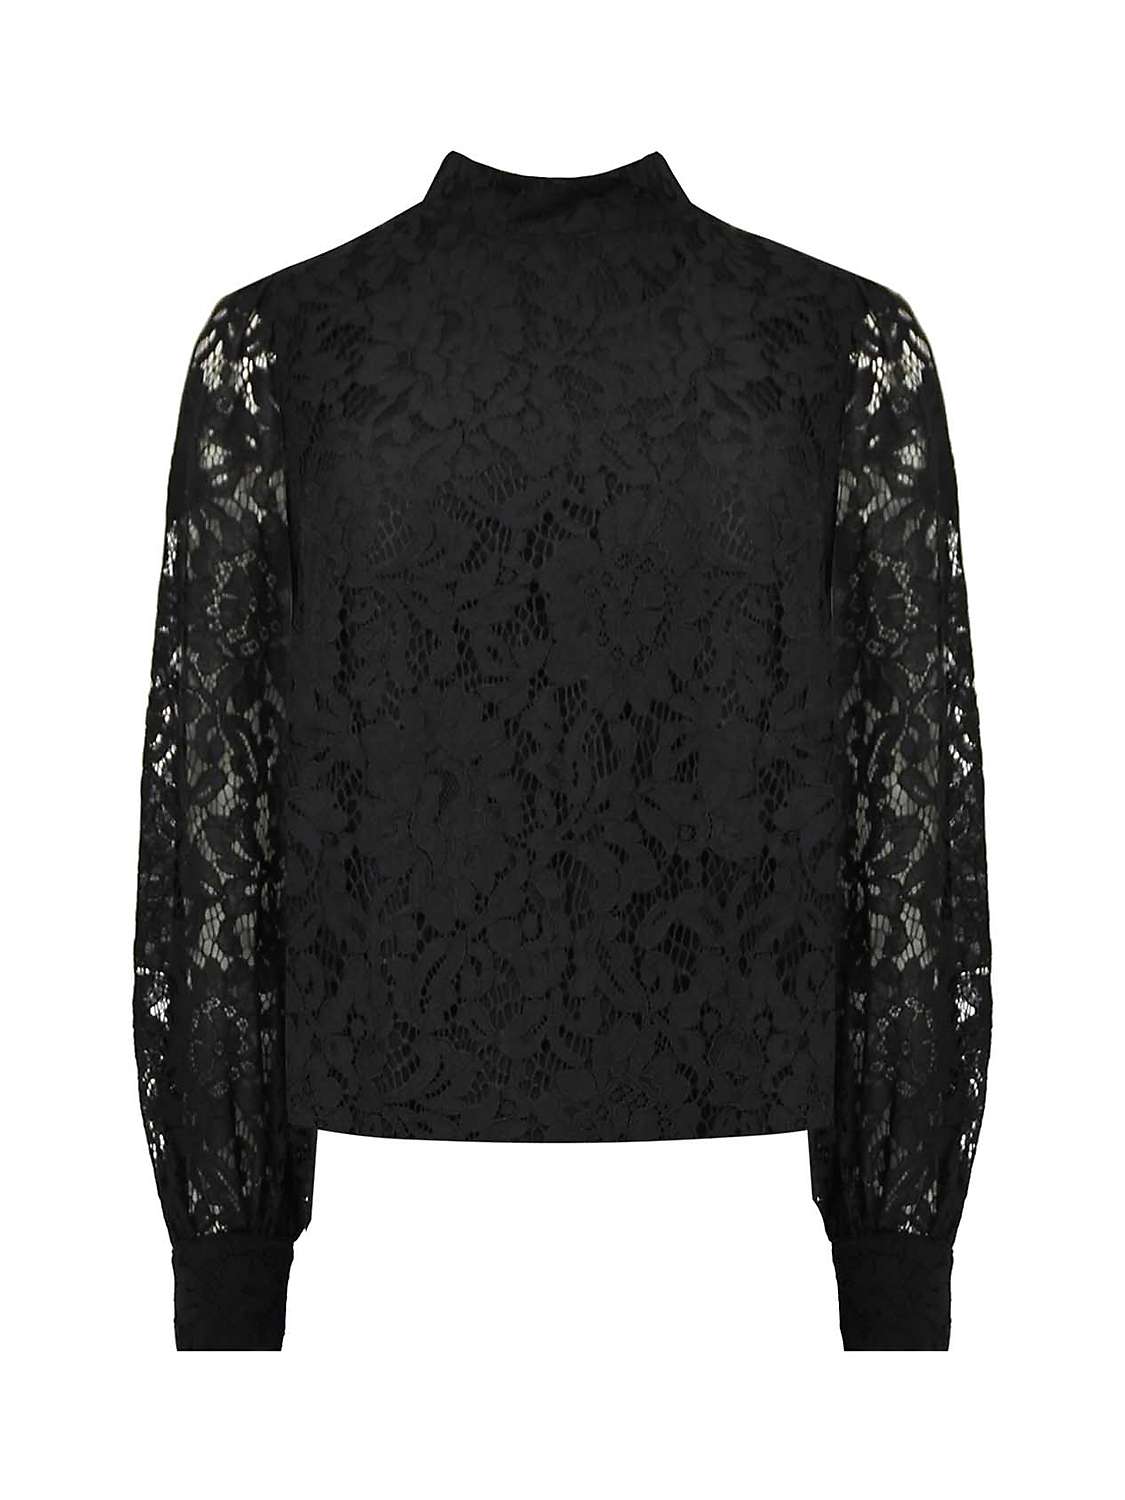 Buy Ro&Zo High Neck Lace Blouse Online at johnlewis.com